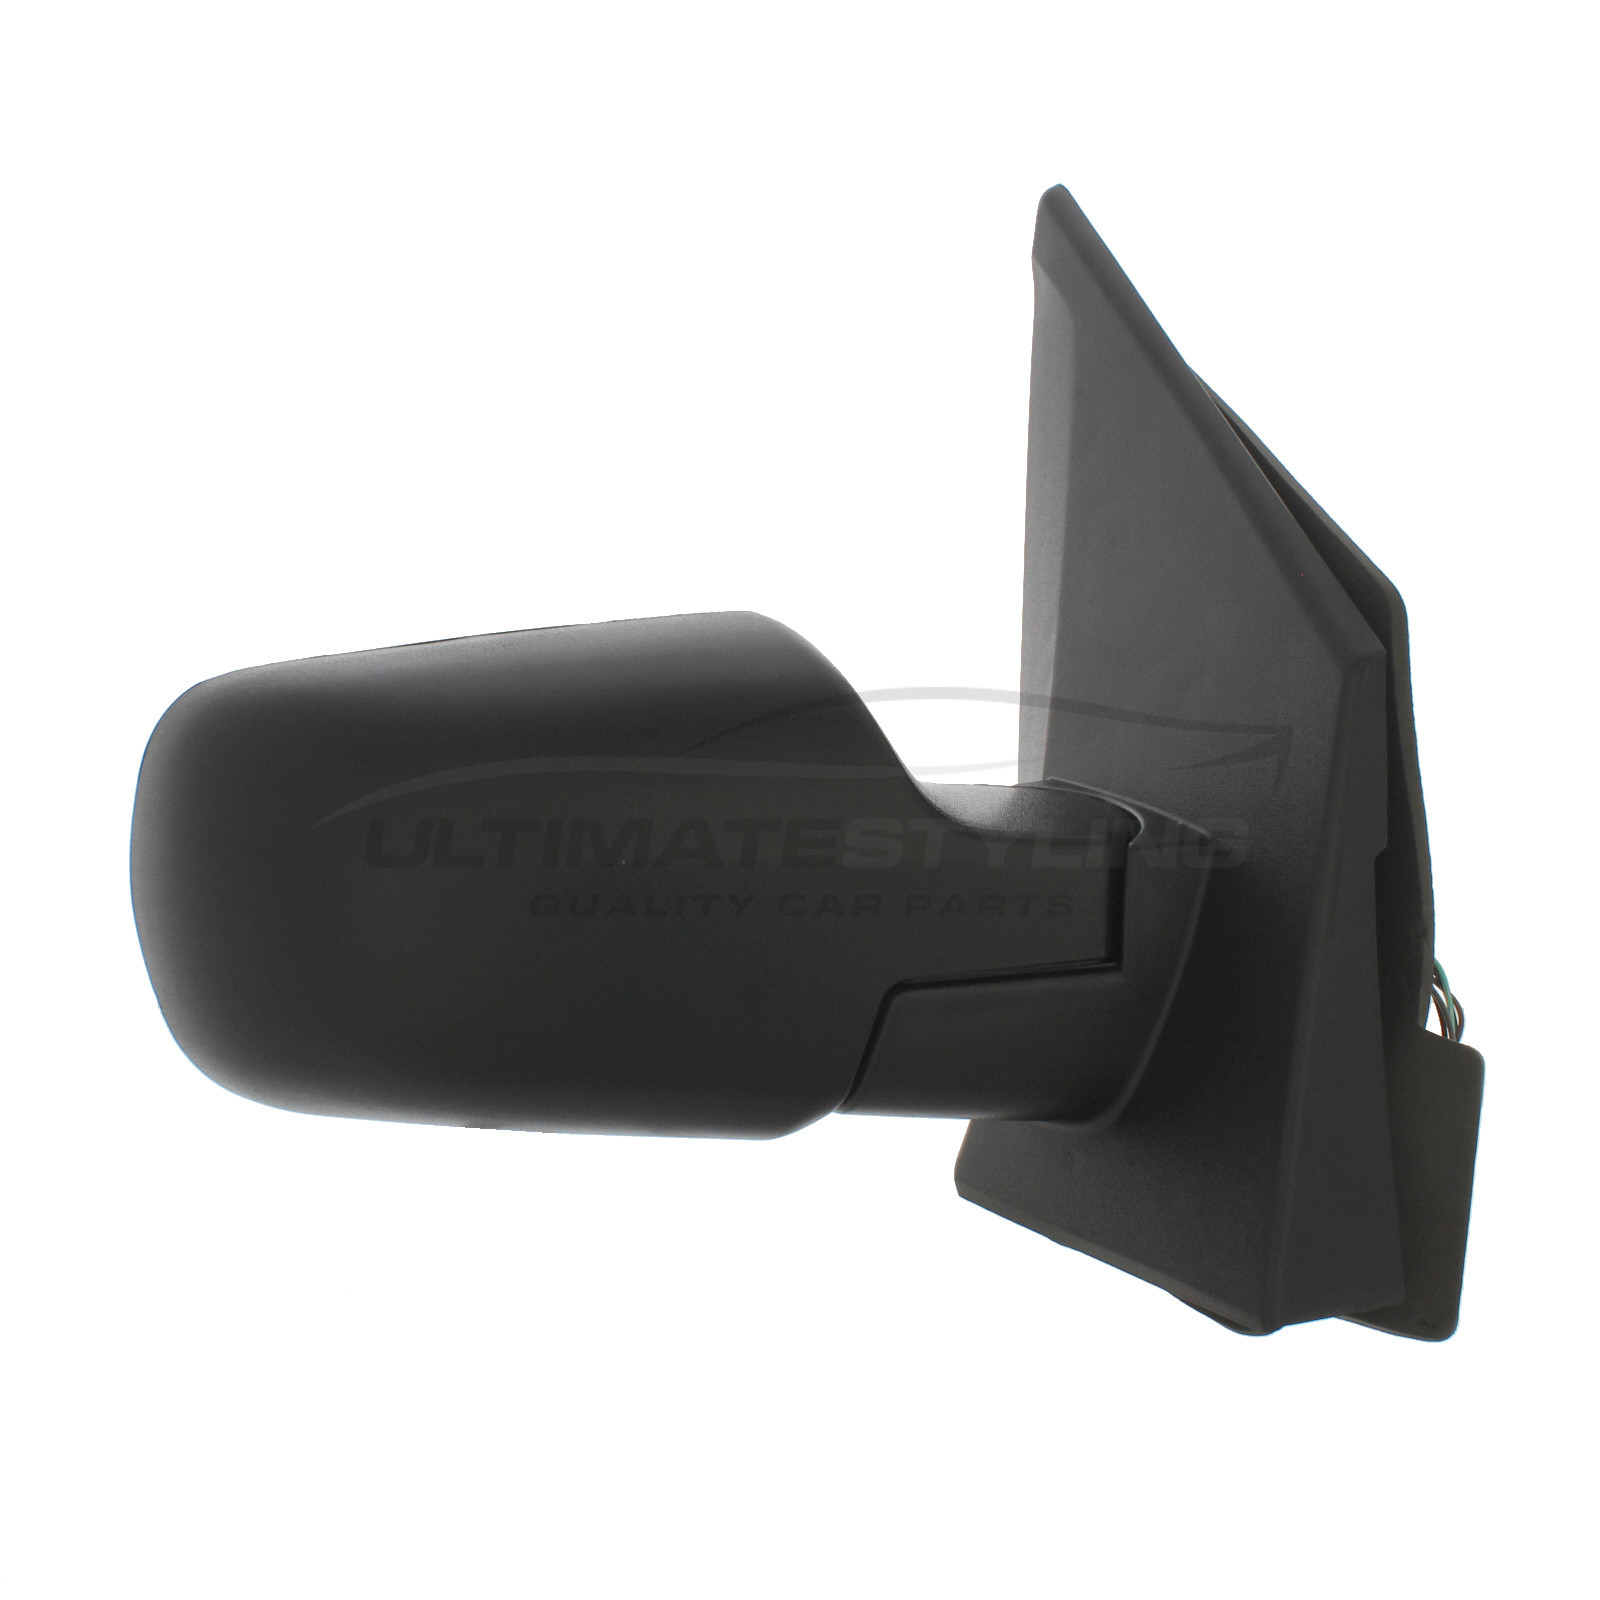 Ford Fusion Wing Mirror / Door Mirror - Drivers Side (RH) - Electric adjustment - Heated Glass - Black